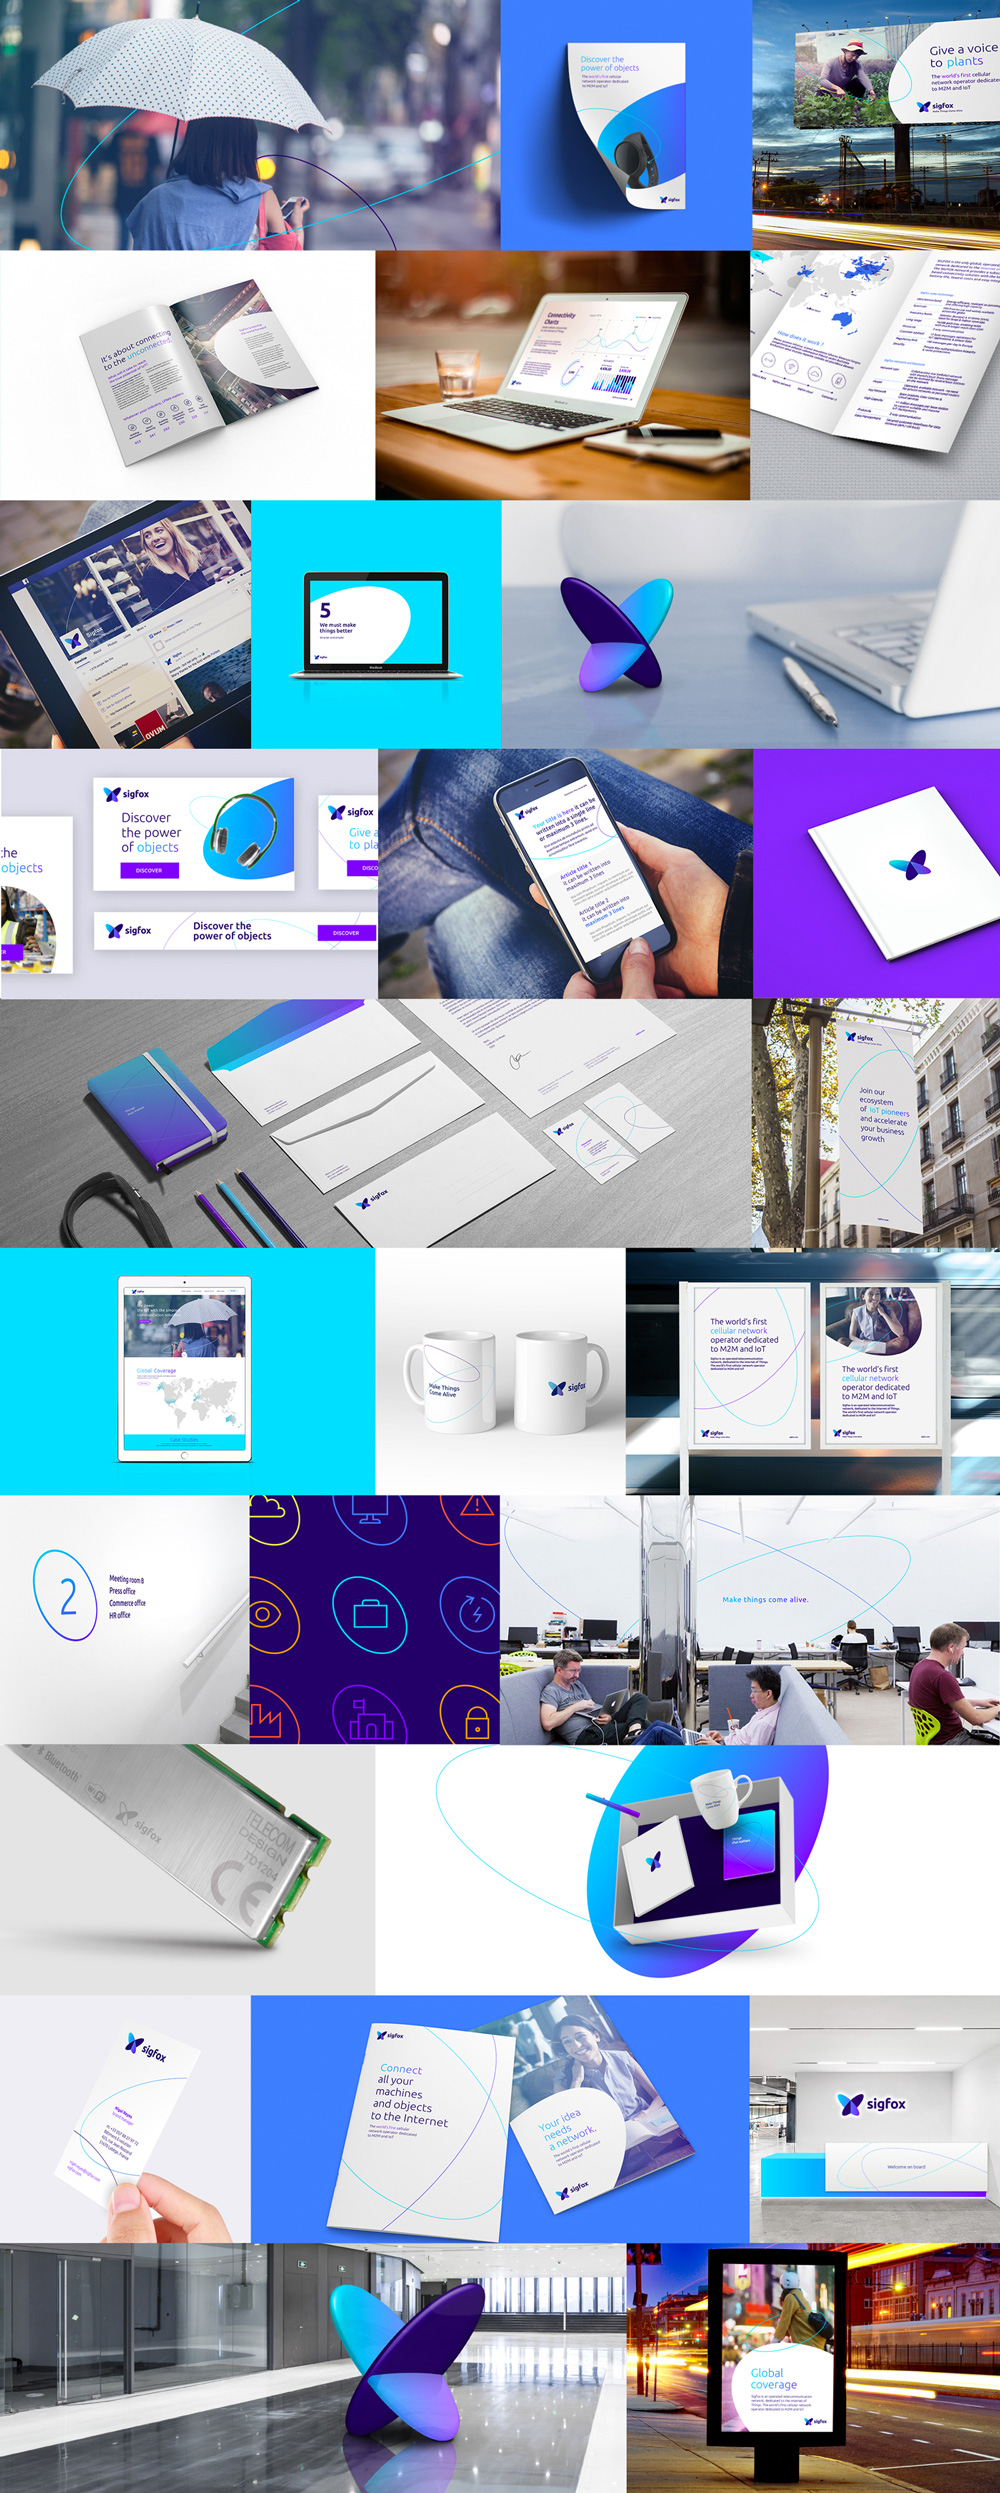 New Logo and Identity for Sigfox by Interbrand